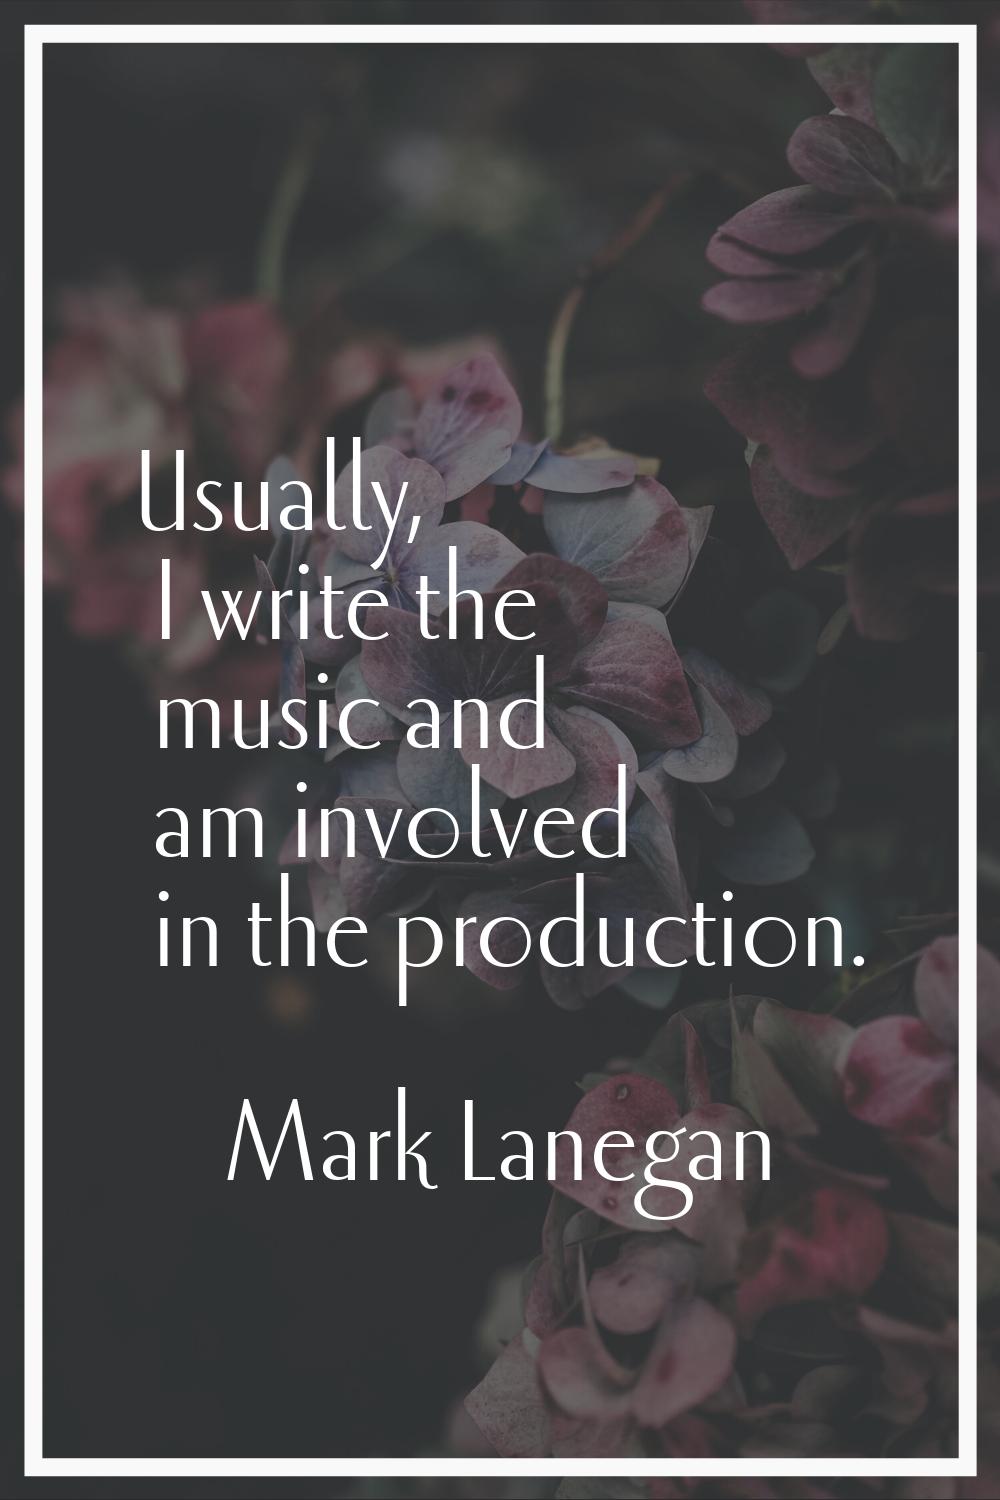 Usually, I write the music and am involved in the production.